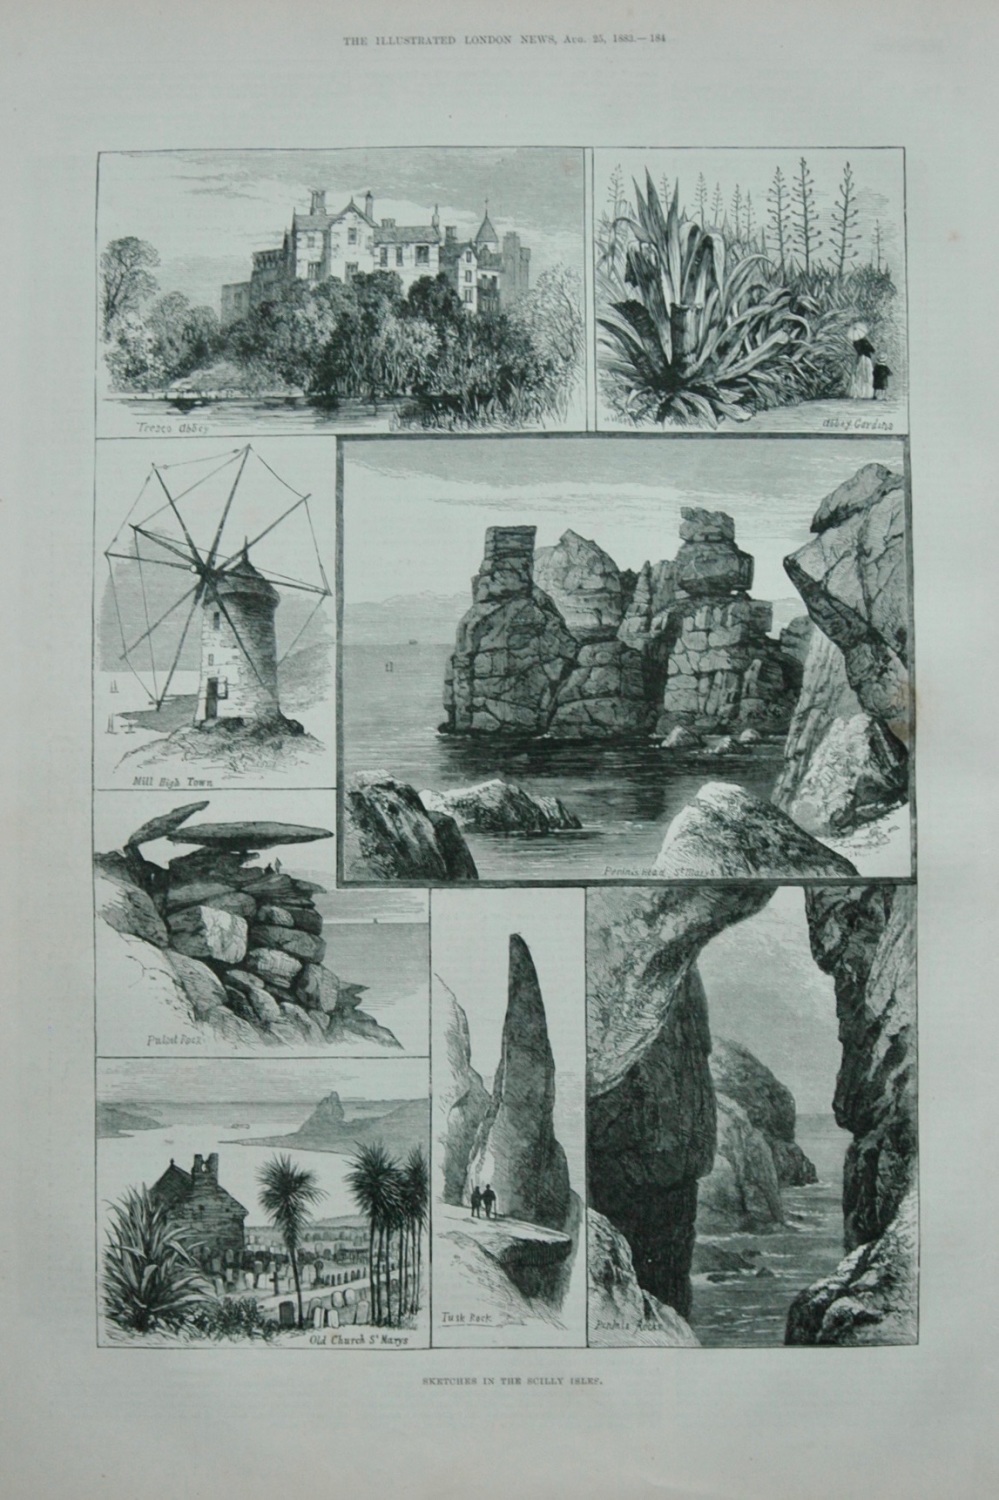 Sketches in the Scilly Isles - 1883